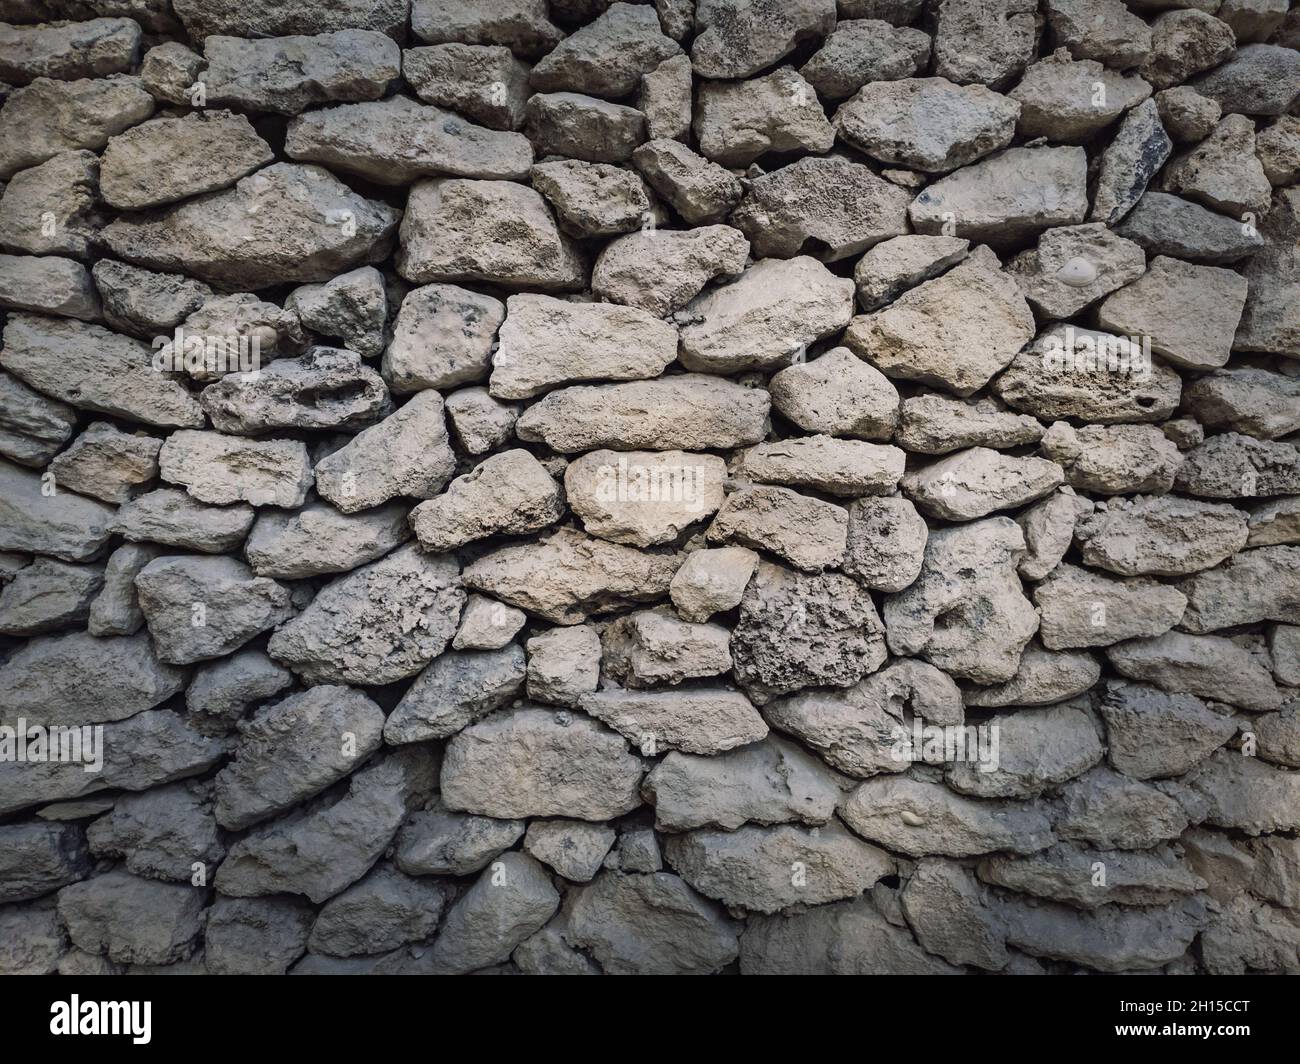 Irregular stone masonry wall background. Old limestone rocks of different size and shapes stacked carefully. Detailed texture of construction element. Stock Photo